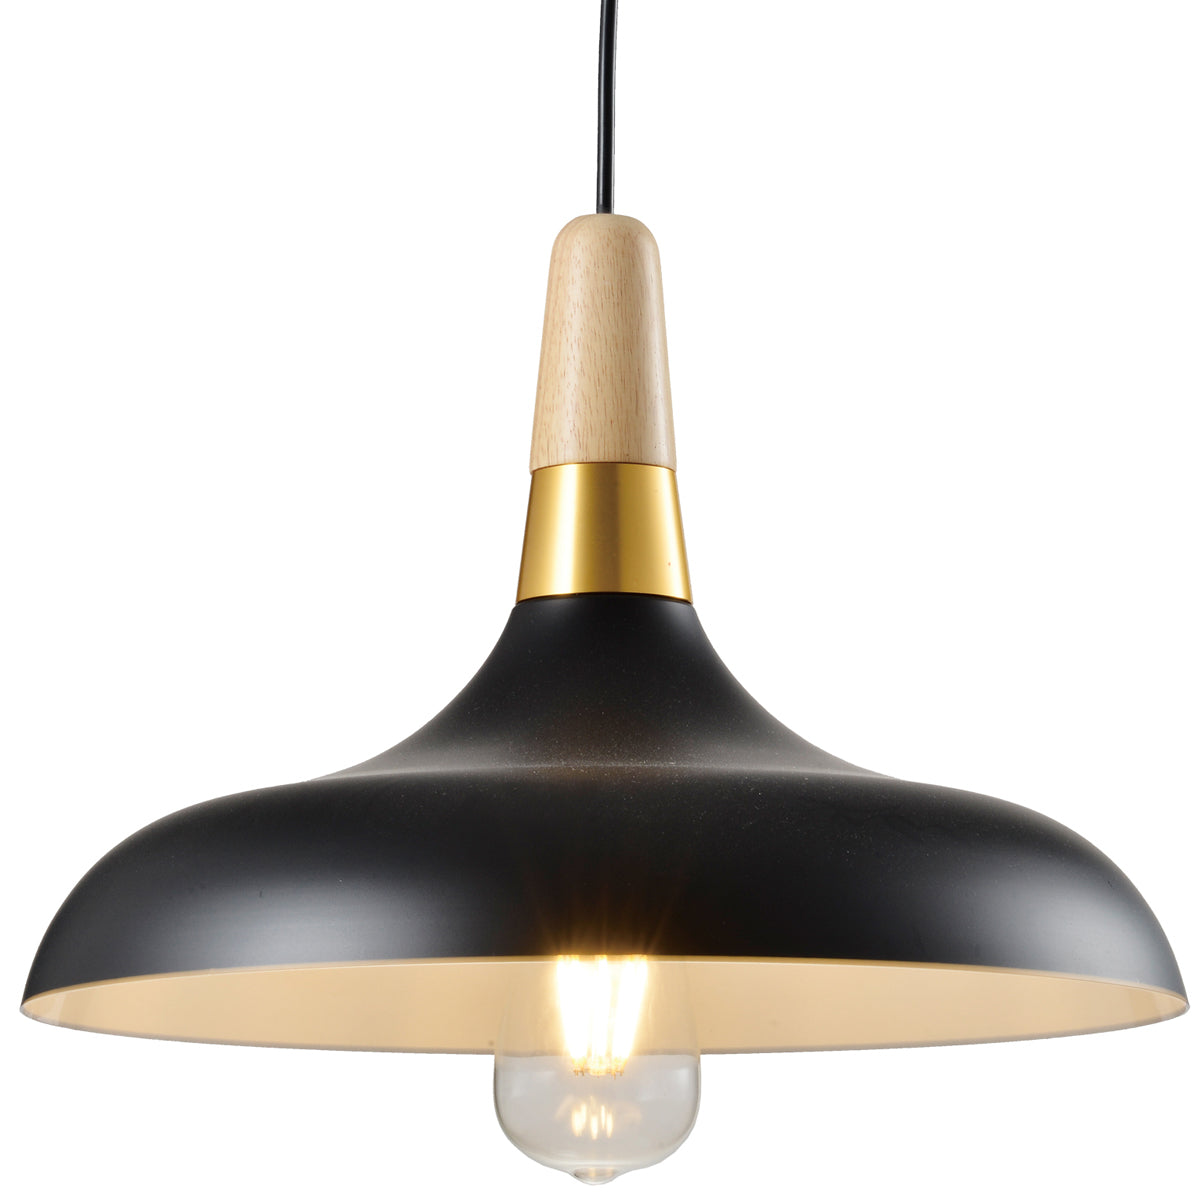 The Esther Pendant is a stylish modern metal ceiling light finished in matt black with a white inner.  Complete with a gold and wooden cap detail attached to a black adjustable cable and matching matt black ceiling rose.